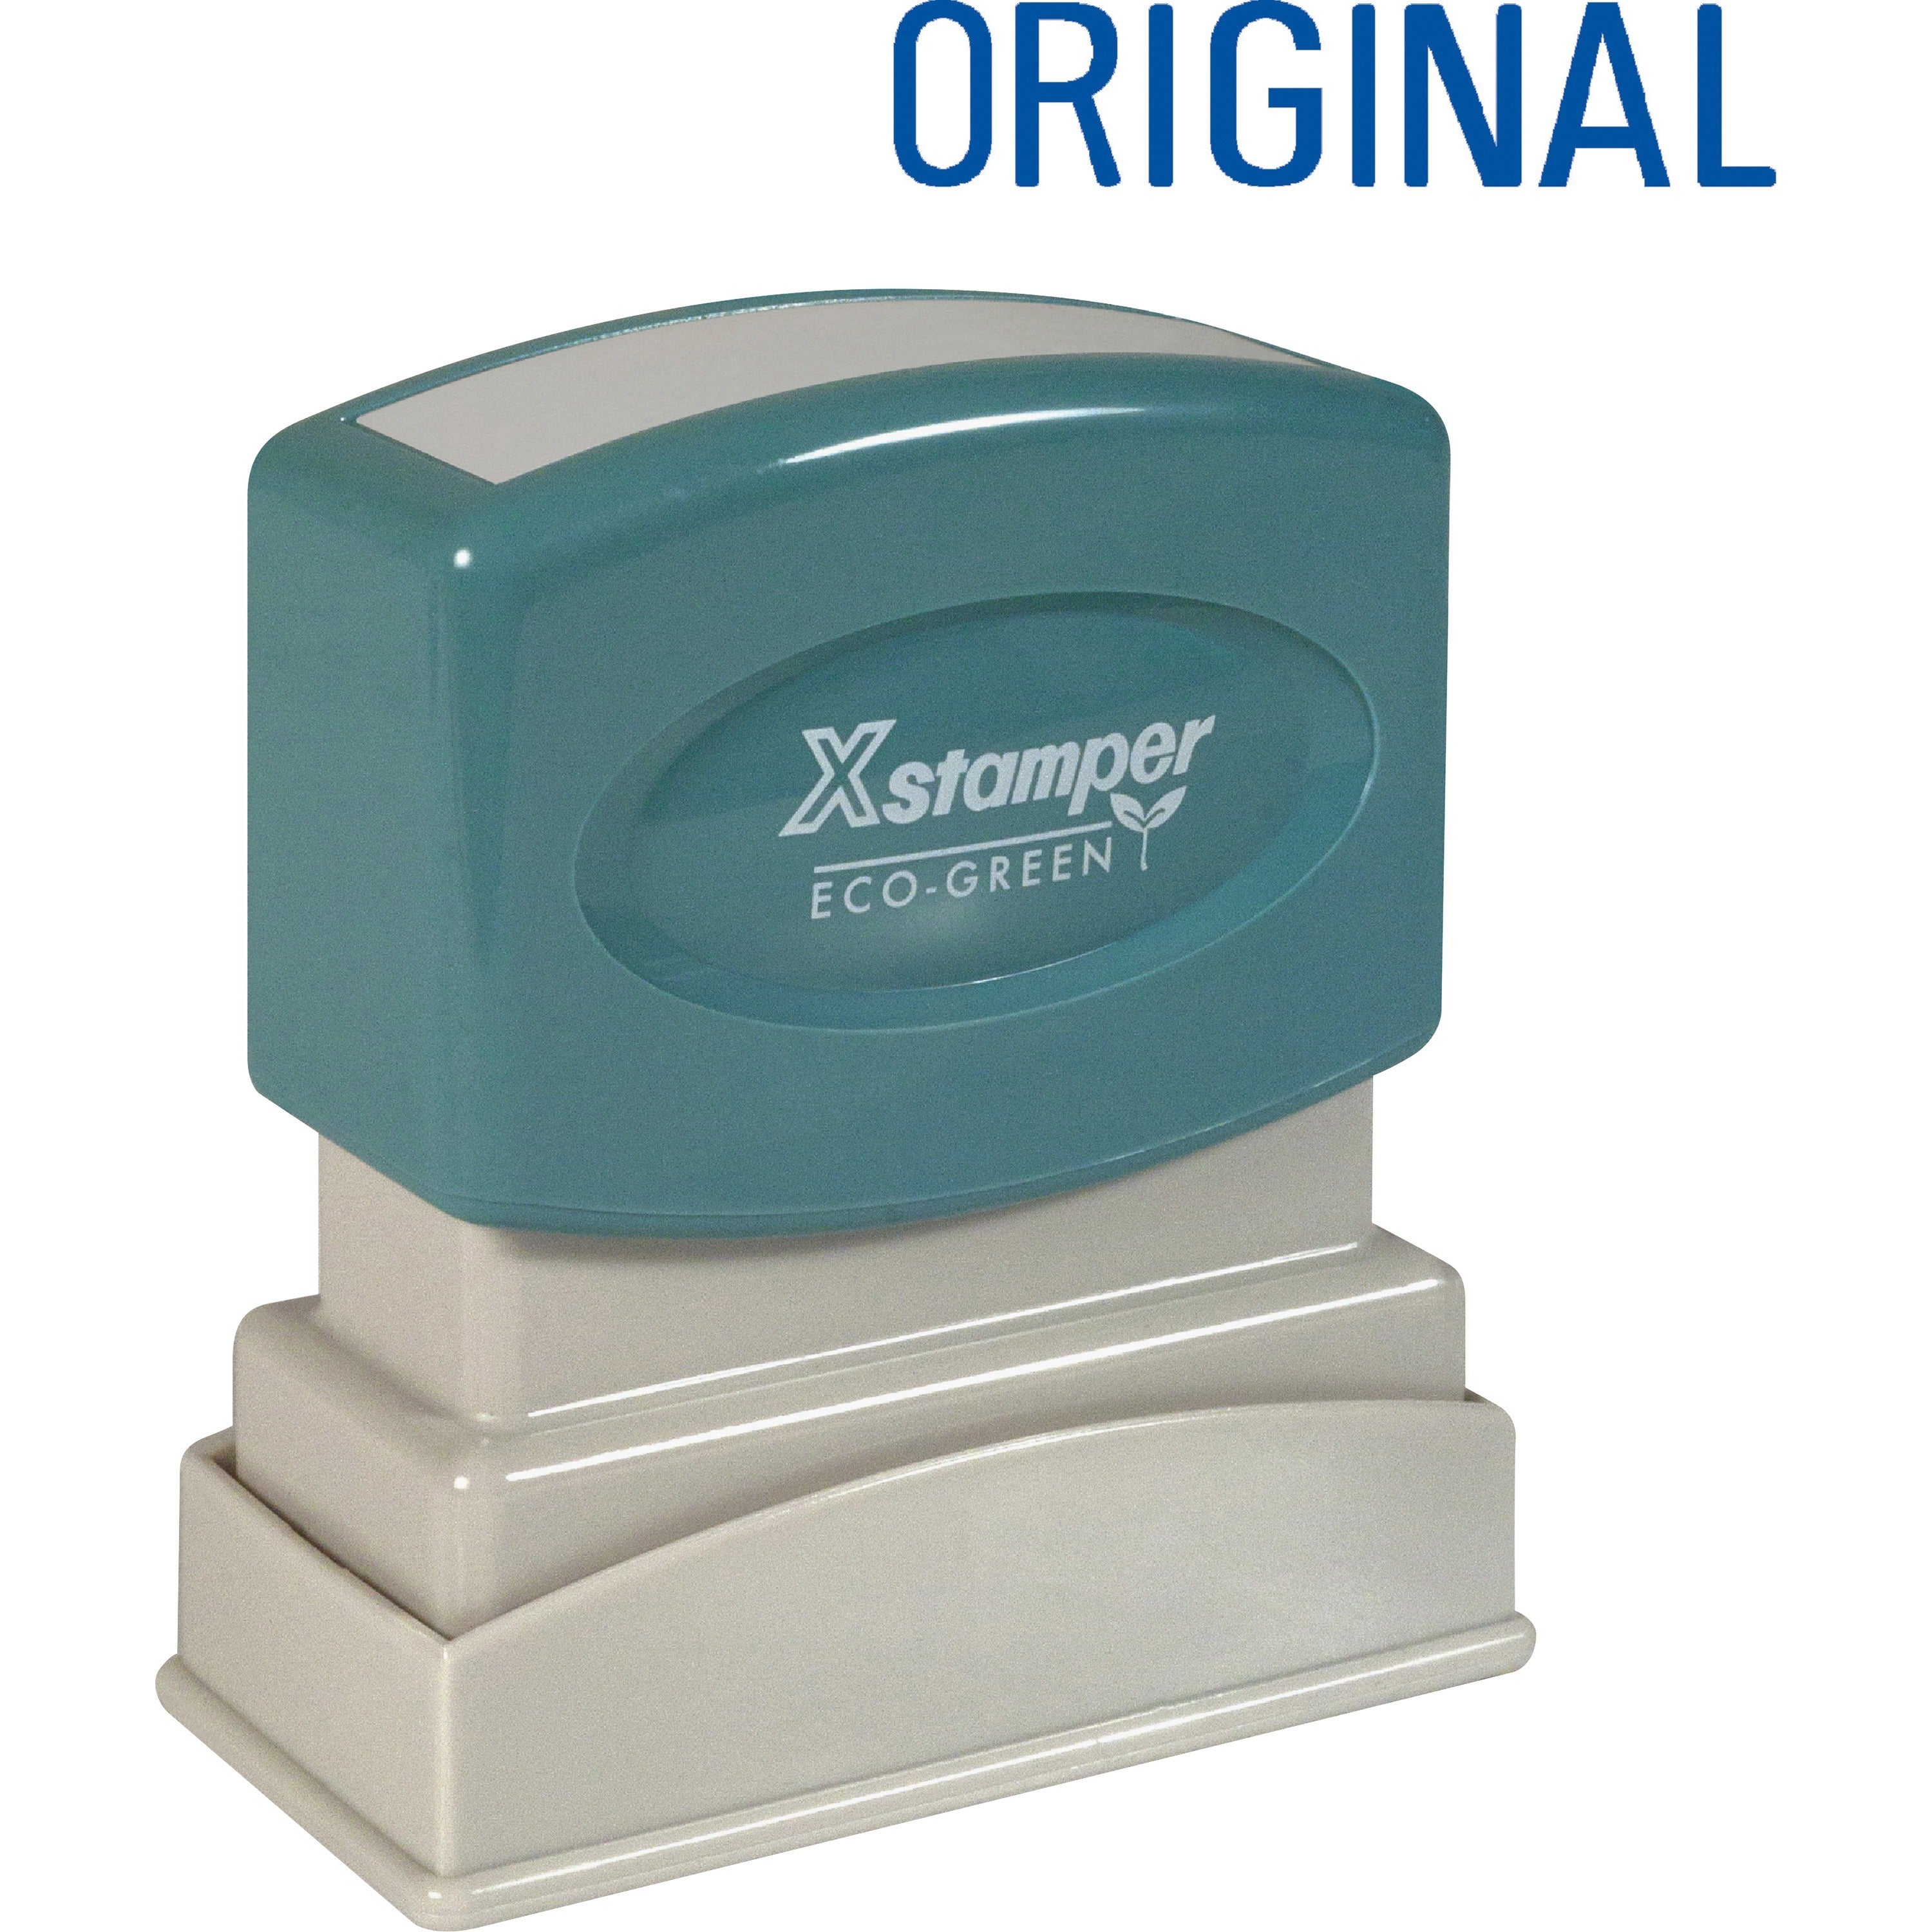 Xstamper ORIGINAL Title Stamp - Message Stamp - "ORIGINAL" - 0.50" Impression Width x 1.63" Impression Length - 100000 Impression(s) - Blue - Recycled - 1 Each - 